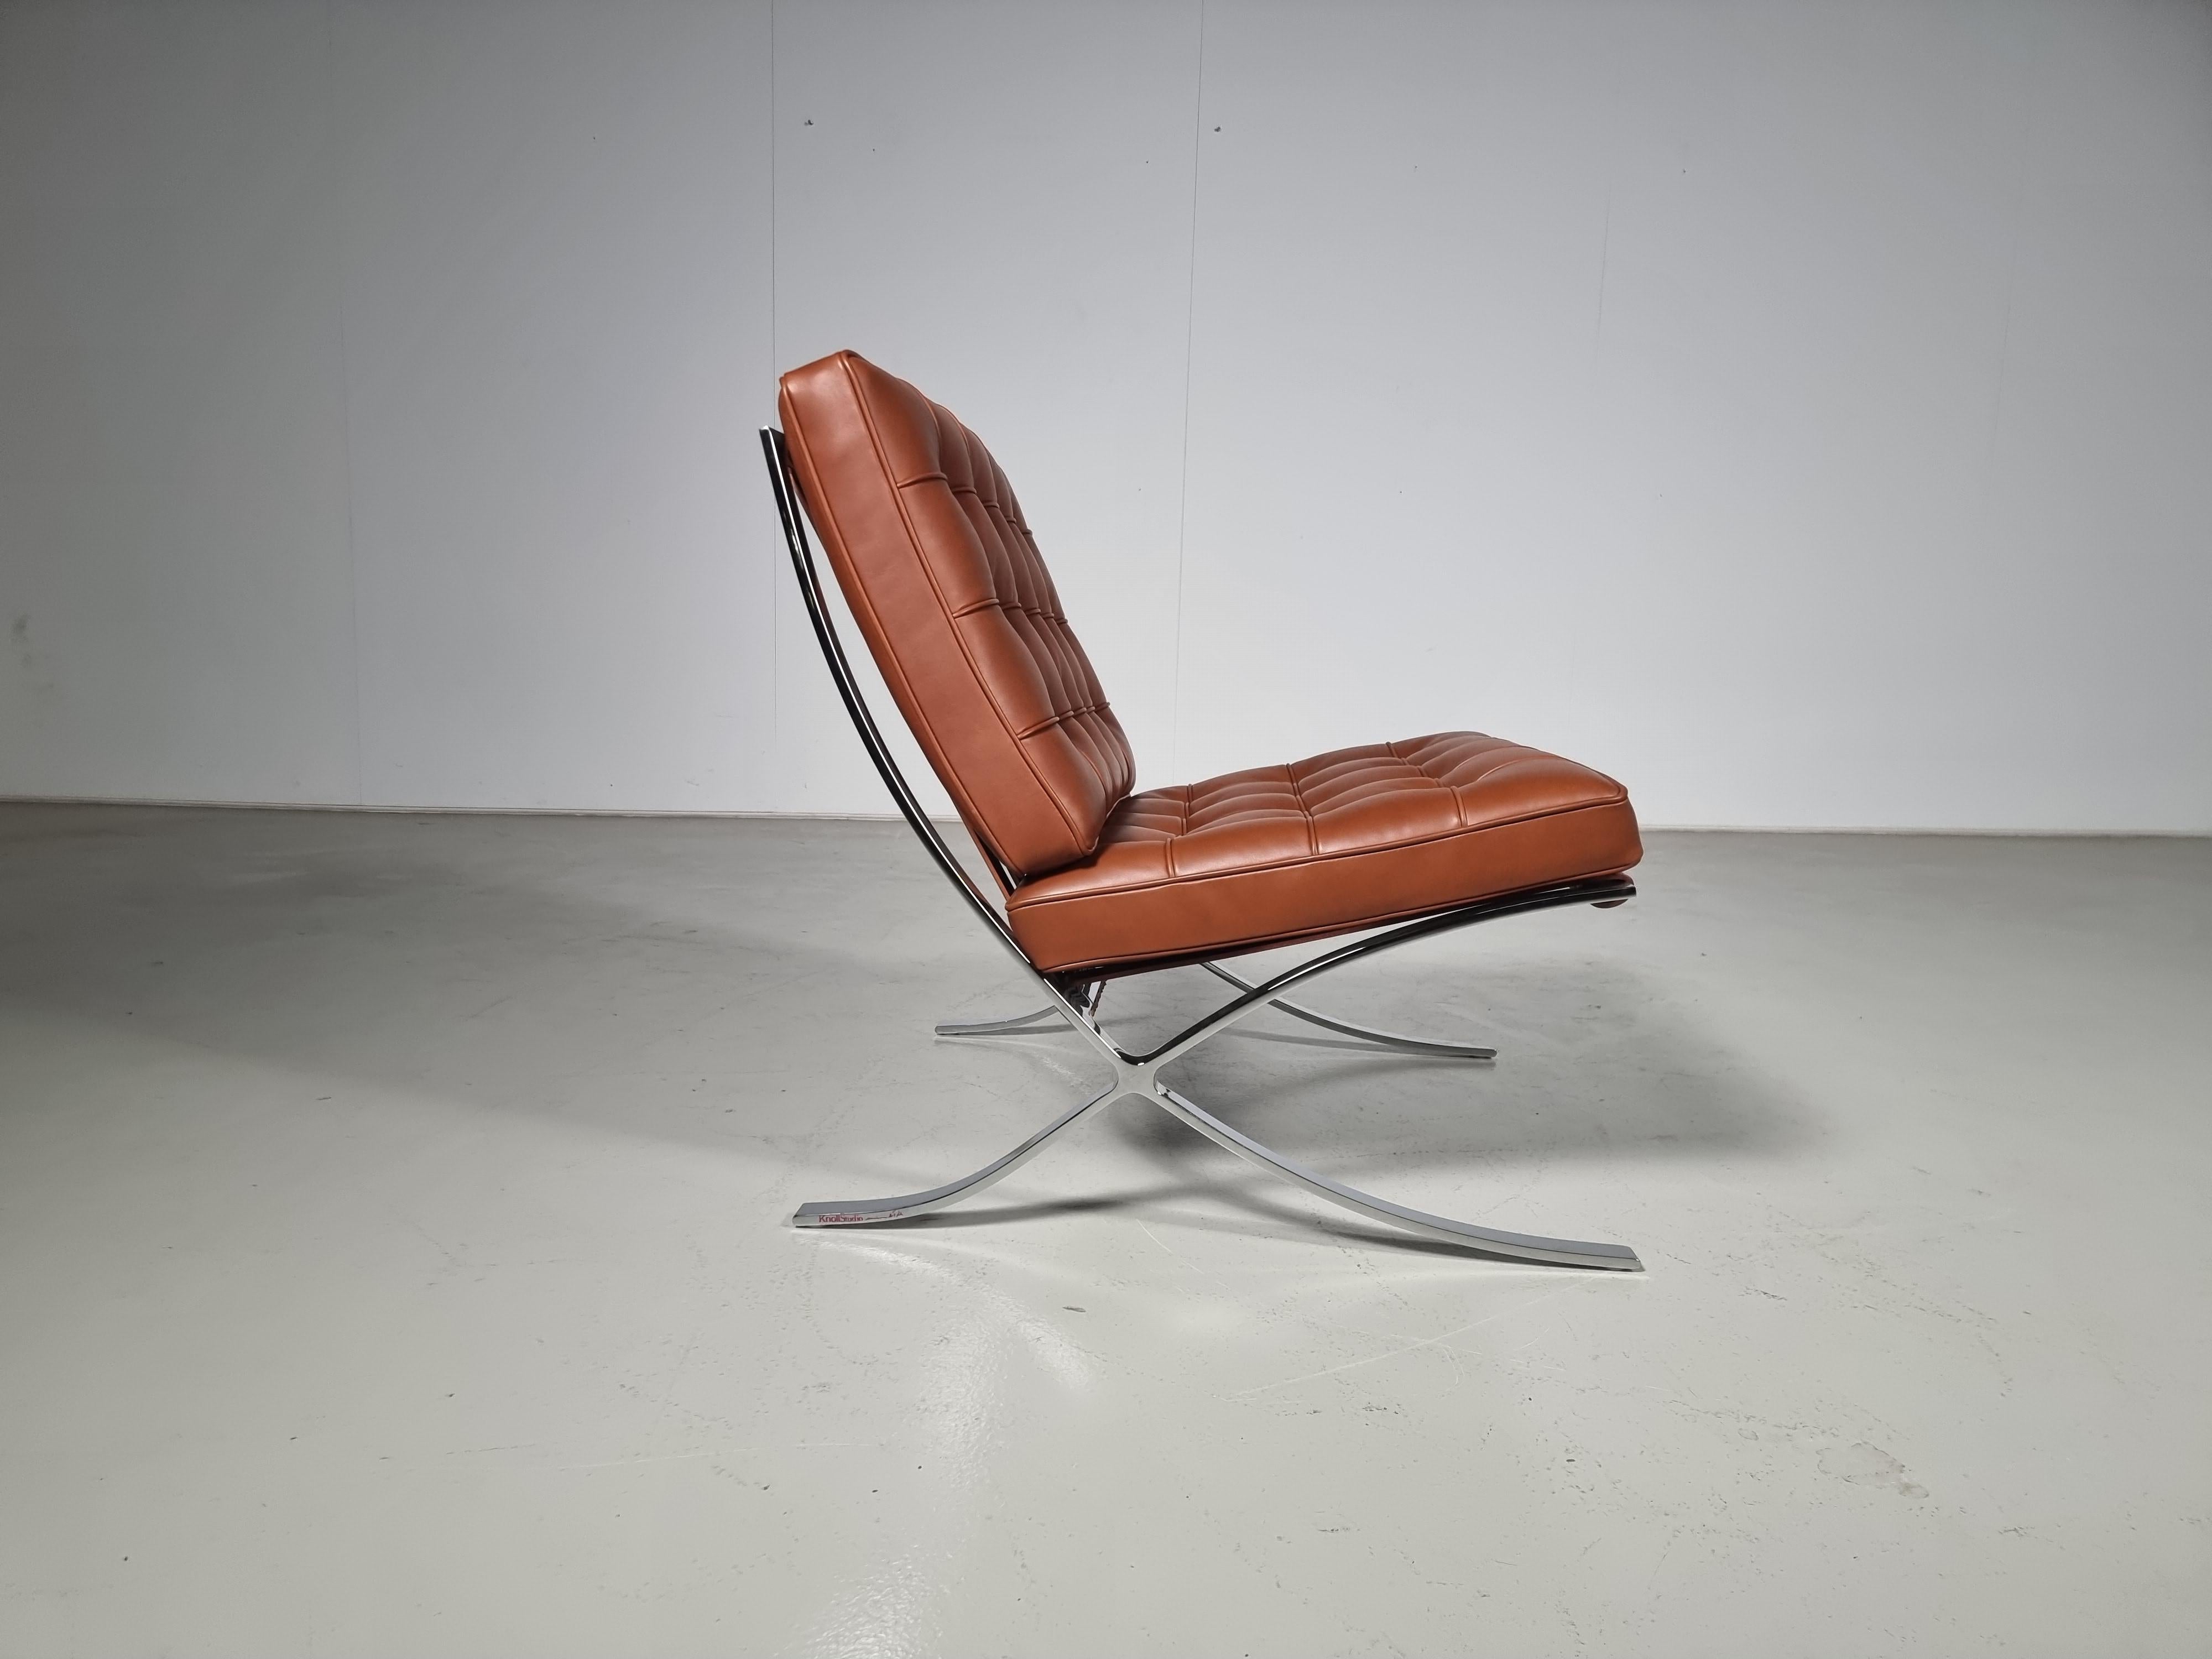 Barcelona chair in  brown leather, Mies van der Rohe, Knoll International

Originally designed in 1926 for the International Exposition, the Barcelona chair was reconfigured in 1950 from a two-part bolted frame to a single stainless steel frame as